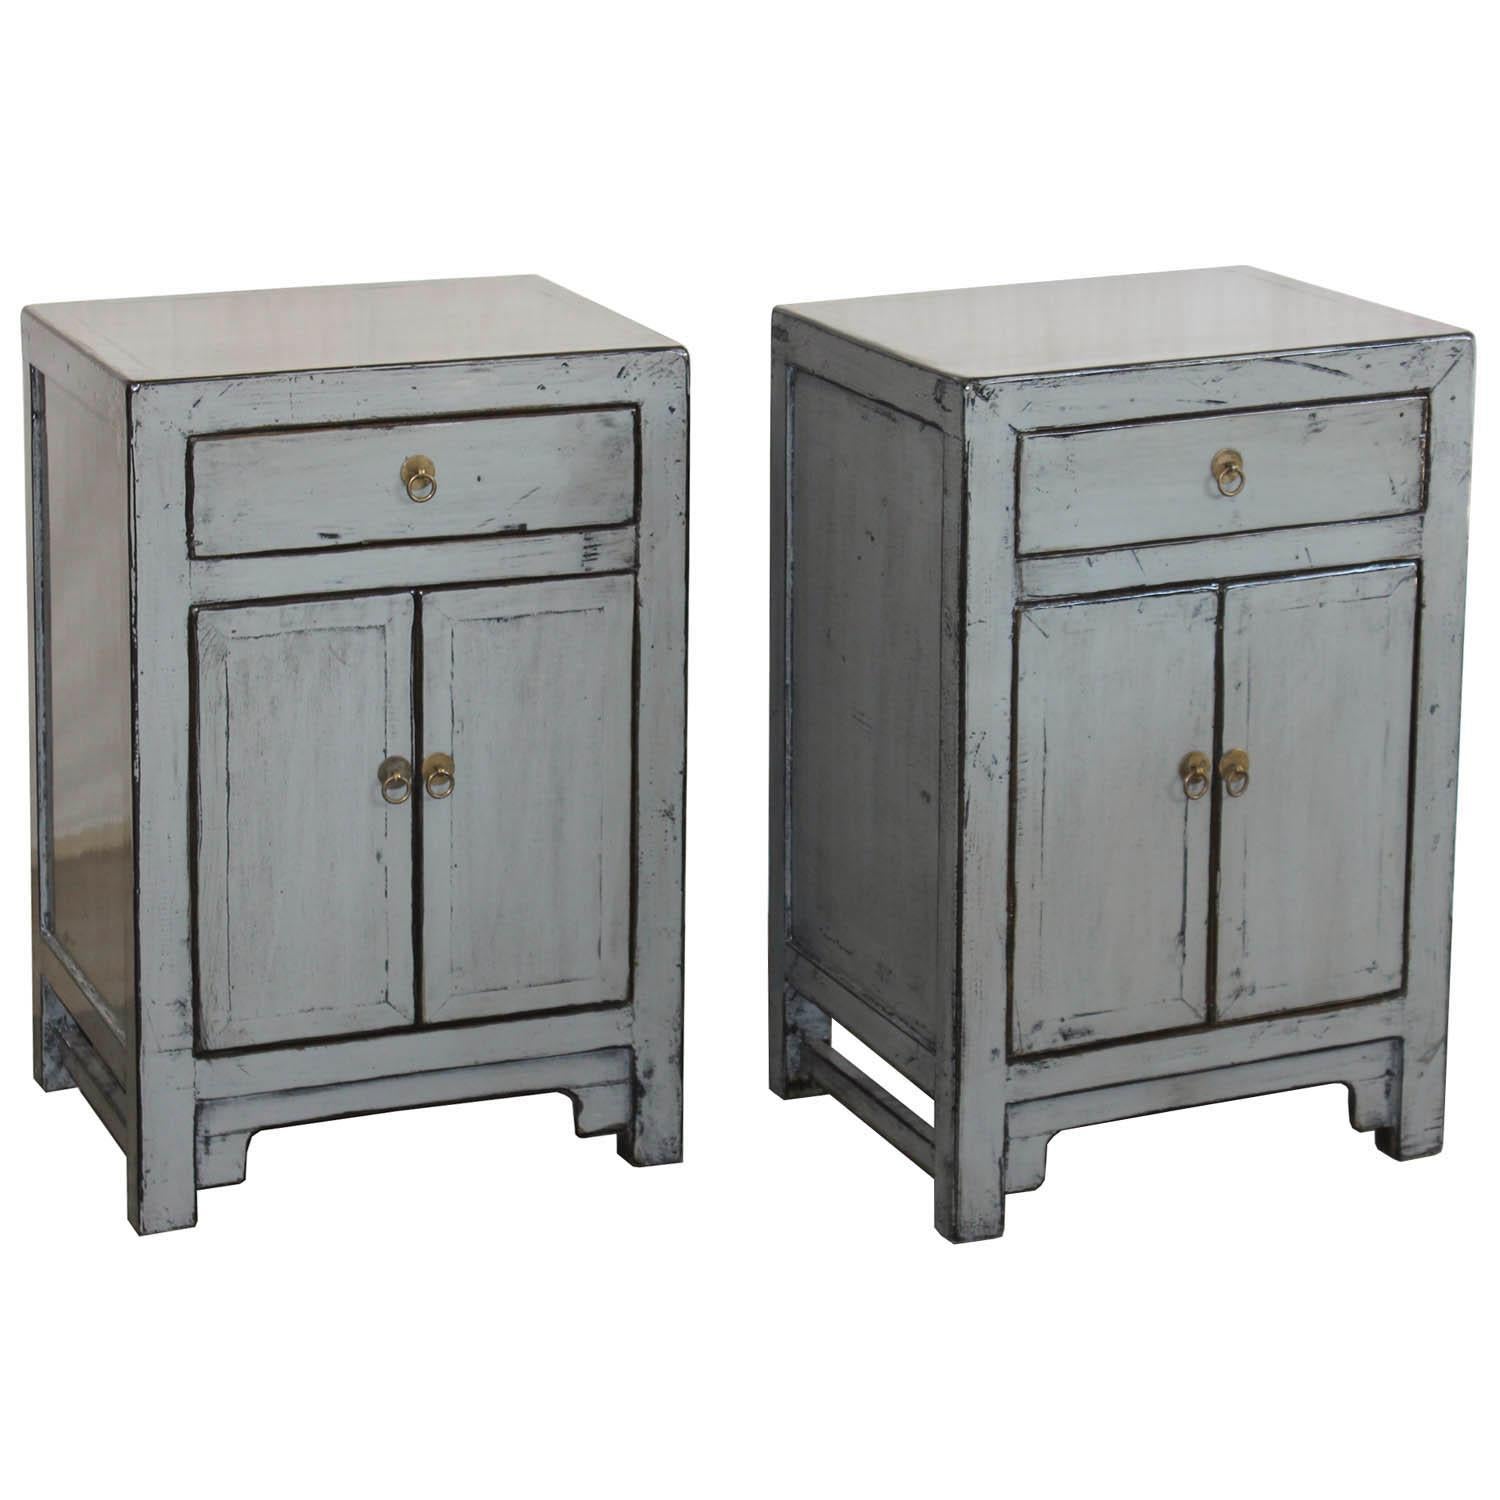 Contemporary one drawer gray lacquer side chest with clean lines and hand rubbed edges can be used as side chests next to a sofa or used as a bedside chest.